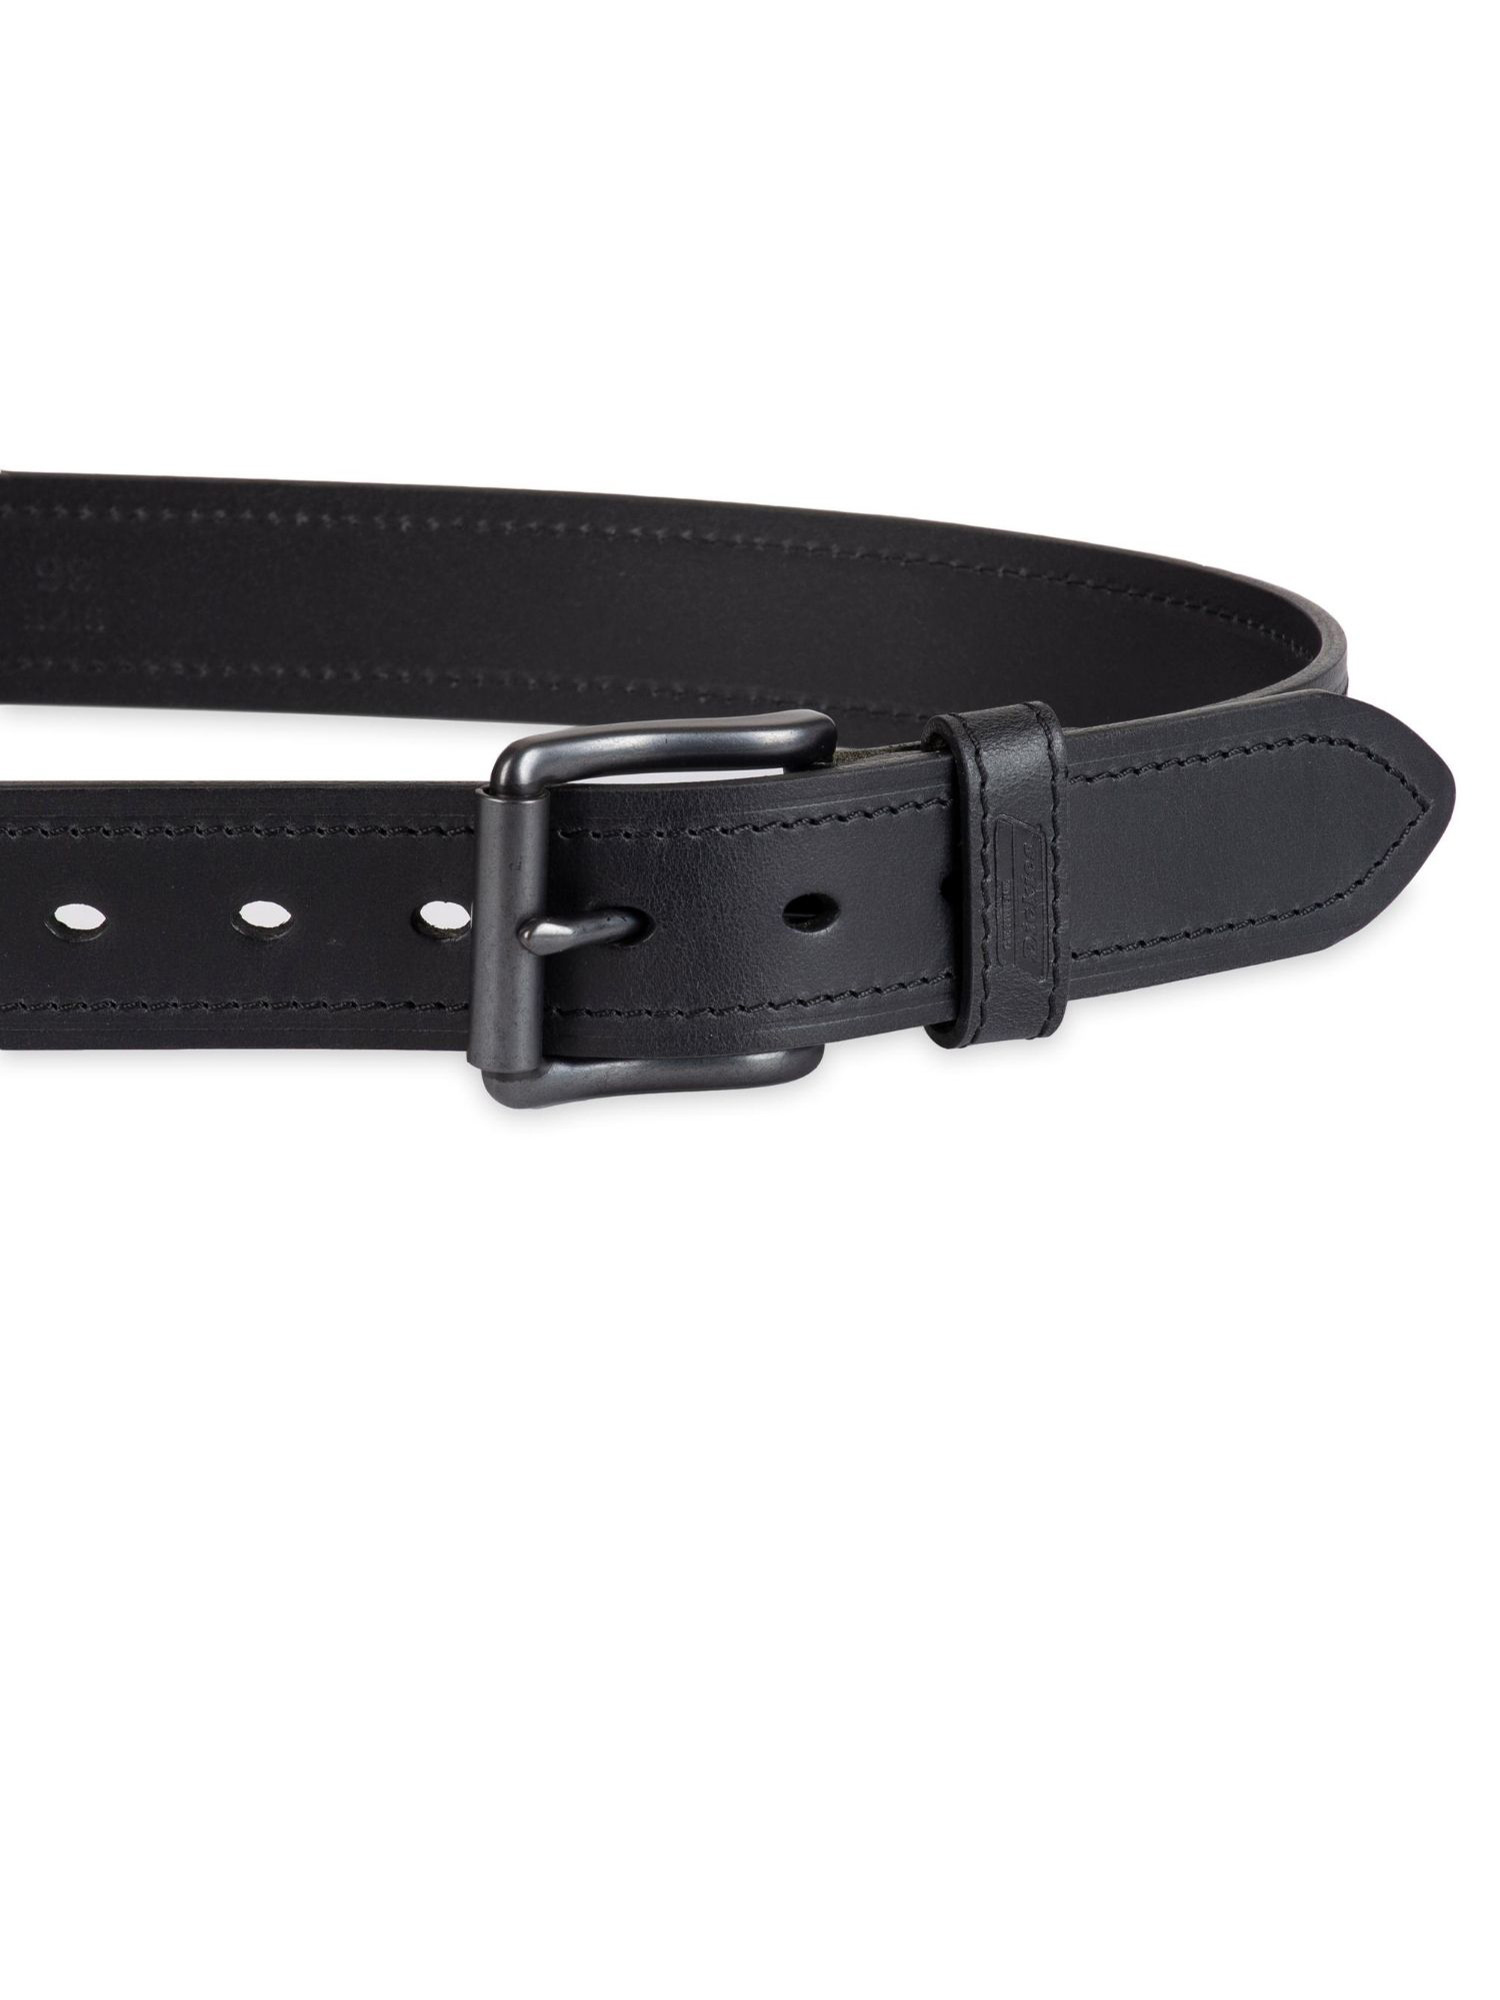 Genuine Dickies Men's Casual Black Leather Work Belt with Roller Buckle (Regular and Big & Tall Sizes) - image 2 of 6